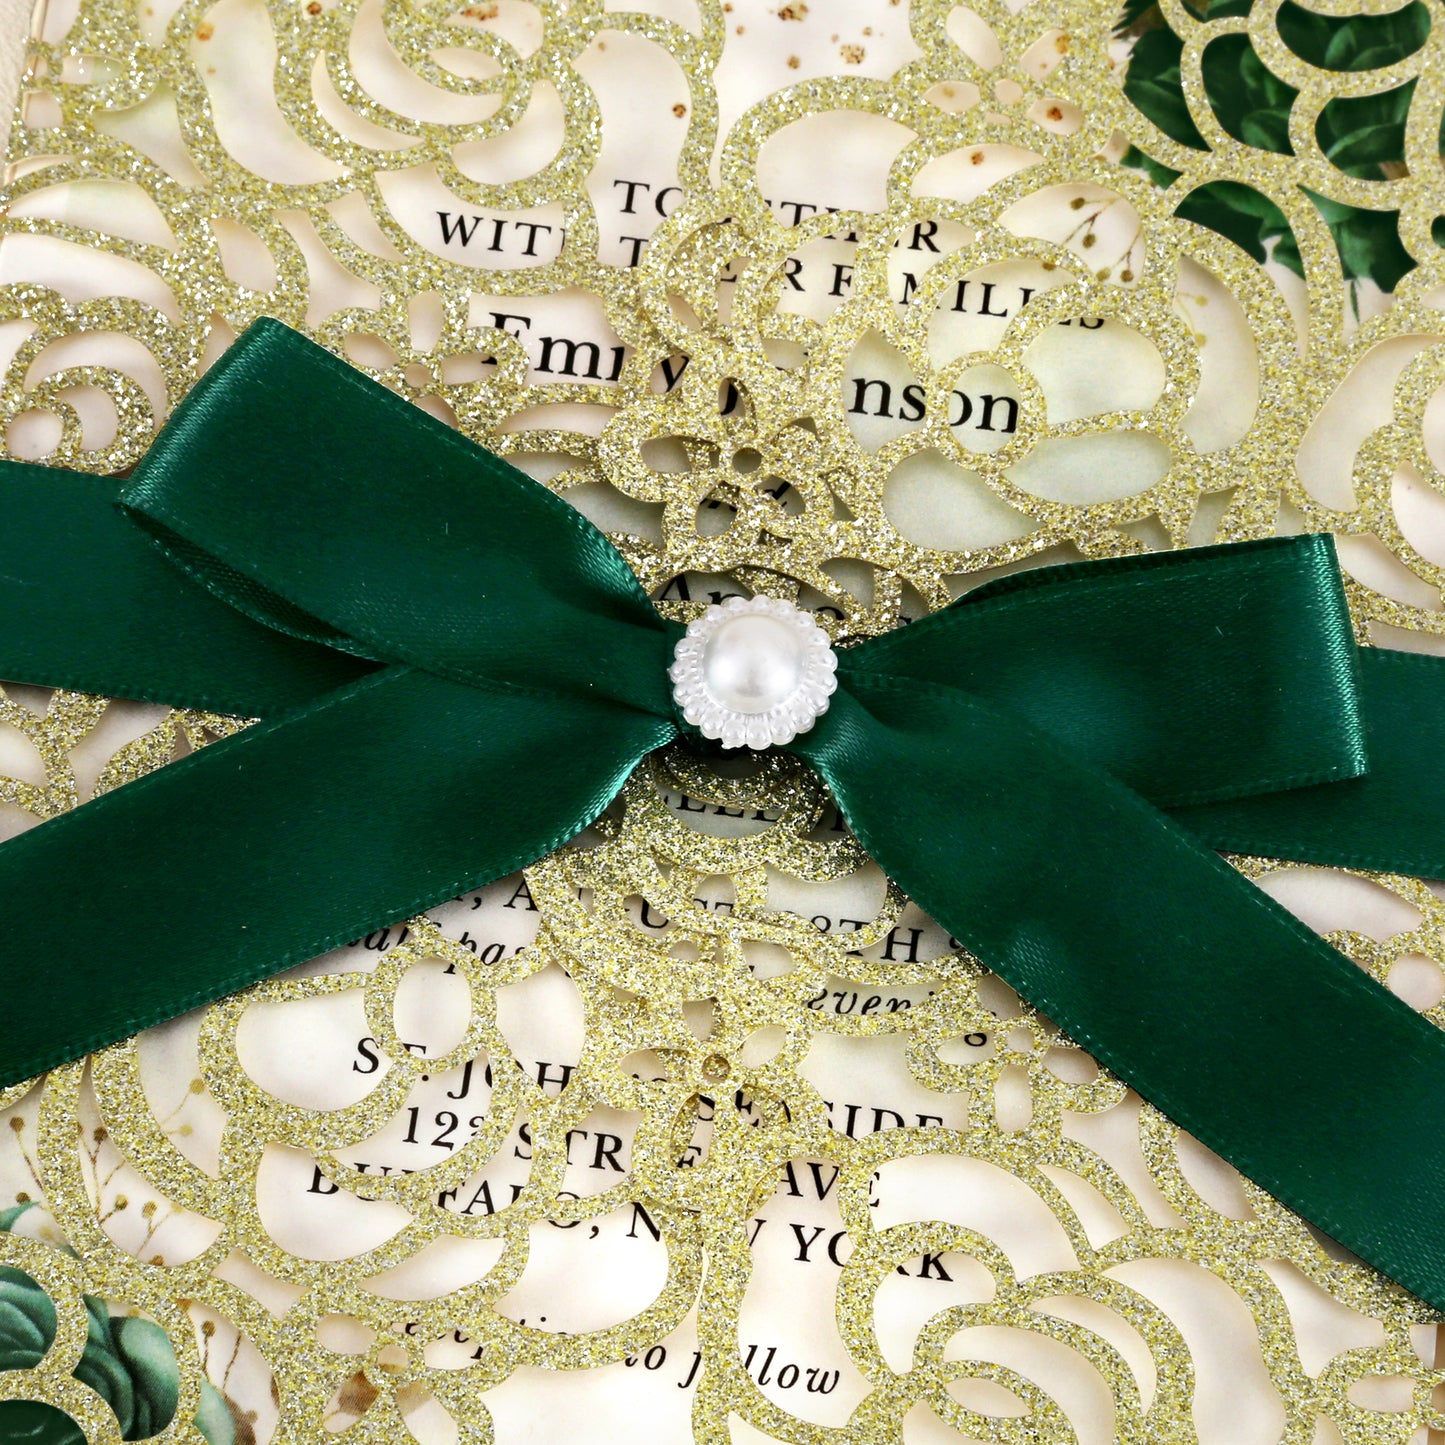 Gold Glitter Floral Laser cut invitation cards with Emerald Green Ribbon and Pearl for Wedding Anniversary